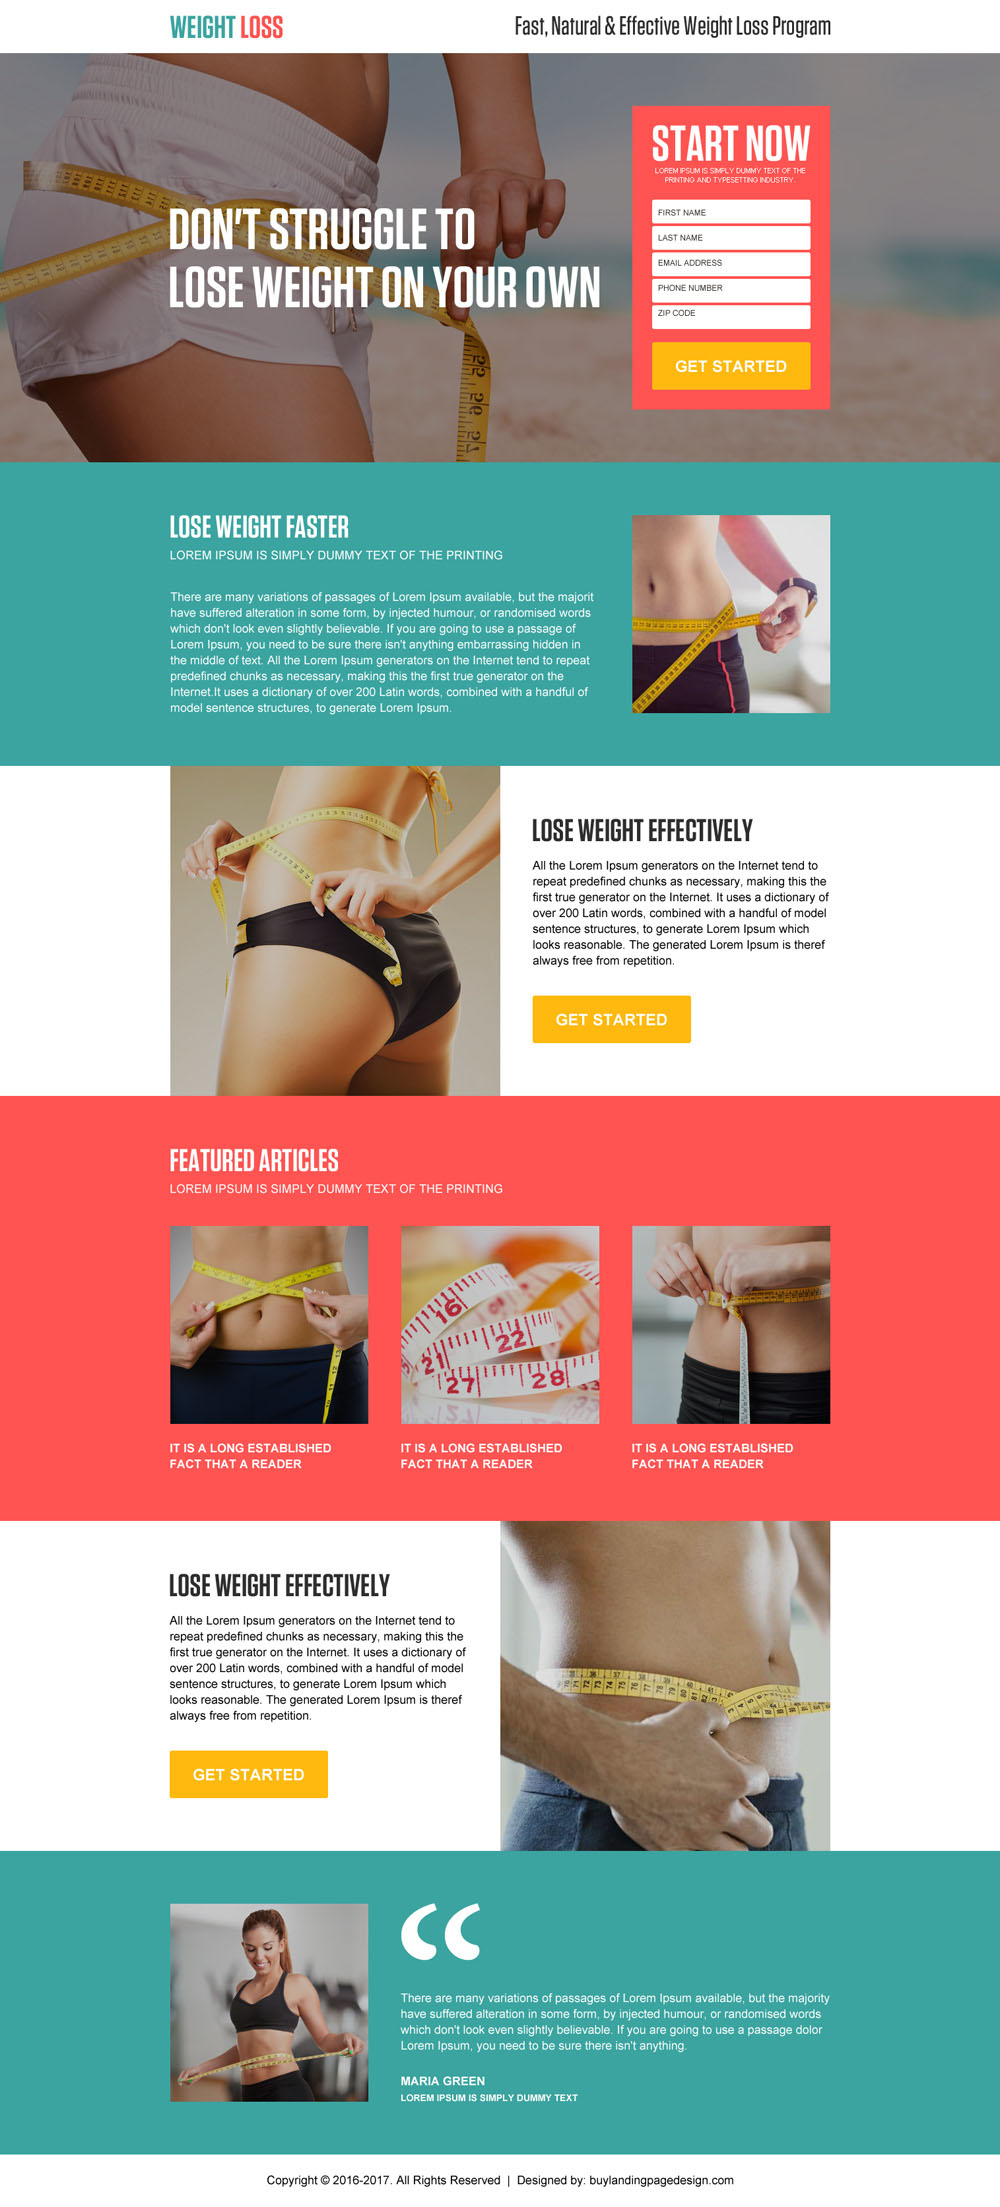 fast-easy-and-natural-best-weight-loss-program-lead-gen-landing-page-design-044